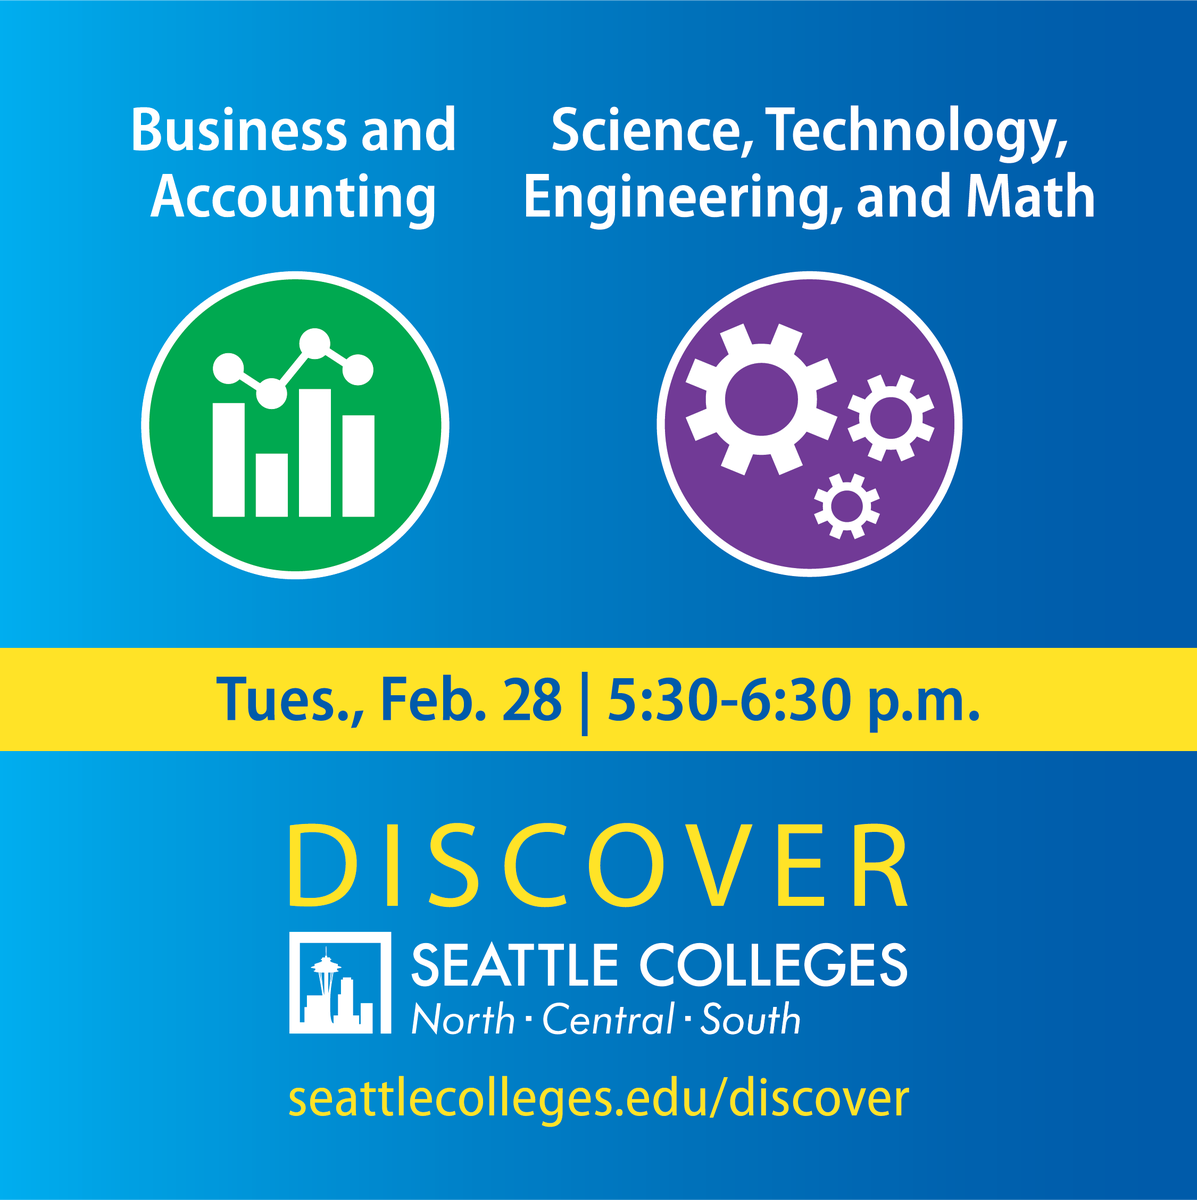 The path to your dream career starts here. Discover the right program for your future and hear from Seattle Colleges instructors and staff. Join us online Tues., Feb. 28, to learn about our Business and Accounting programs and our programs in STEM. seattlecolleges.edu/discover